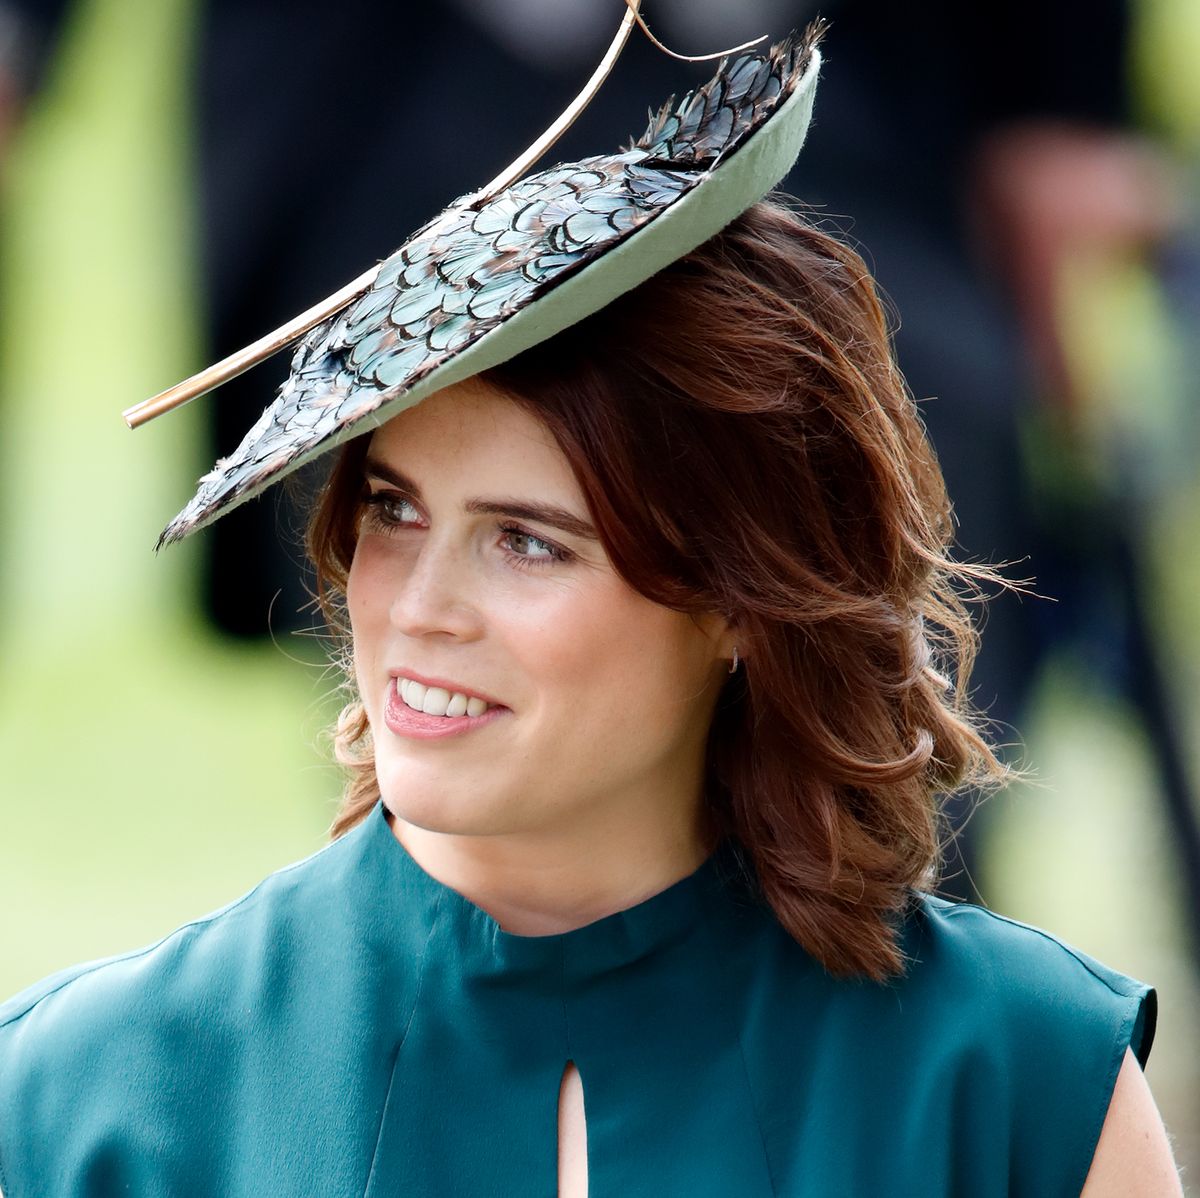 Who Is Princess Eugenie? 8 Facts to Know About the Royal